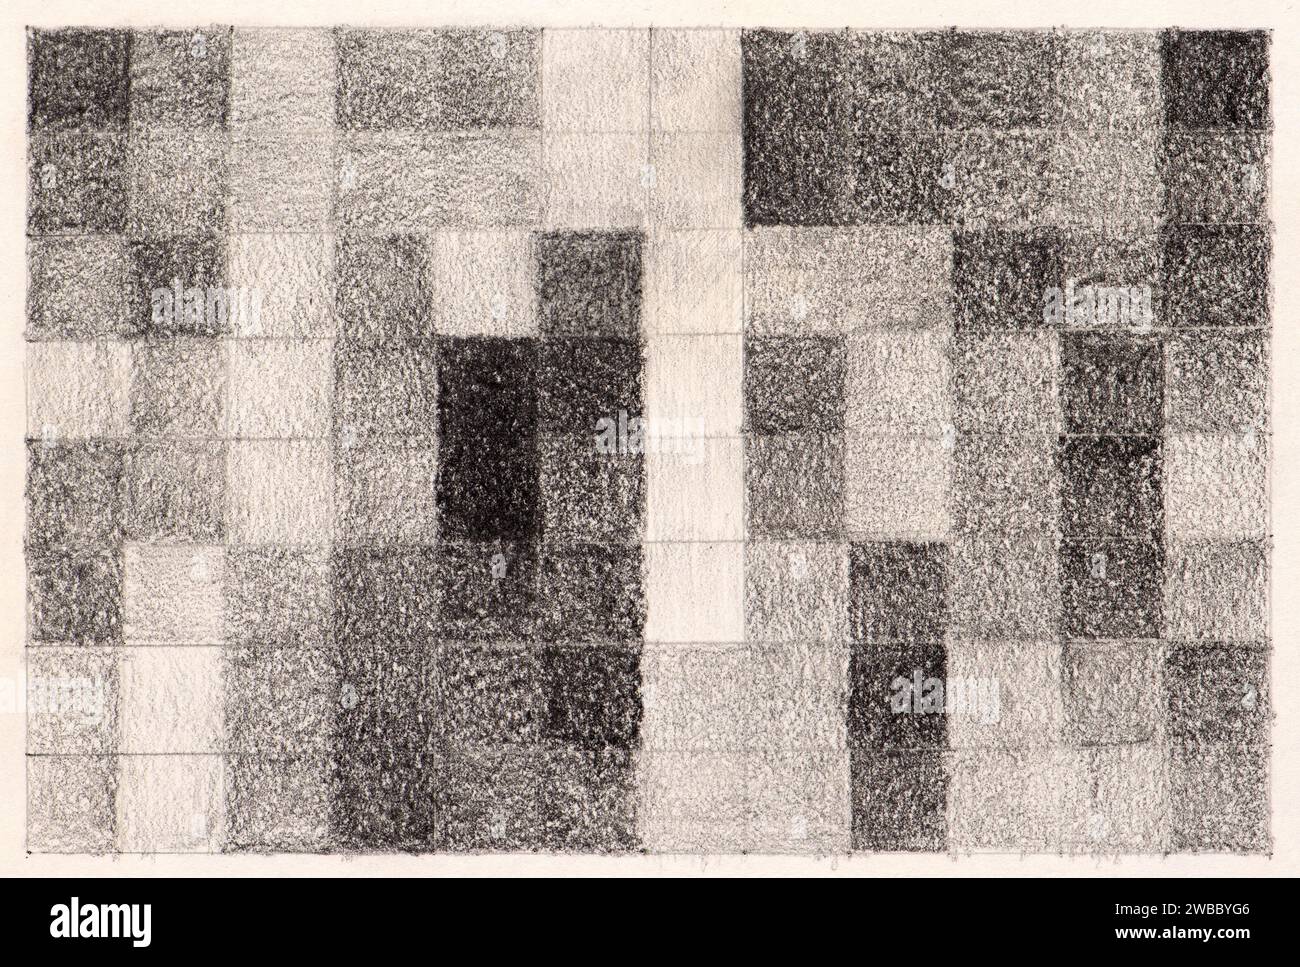 Monochrome square pattern composition with a rough texture background. Charcoal pencil drawing on paper. Stock Photo